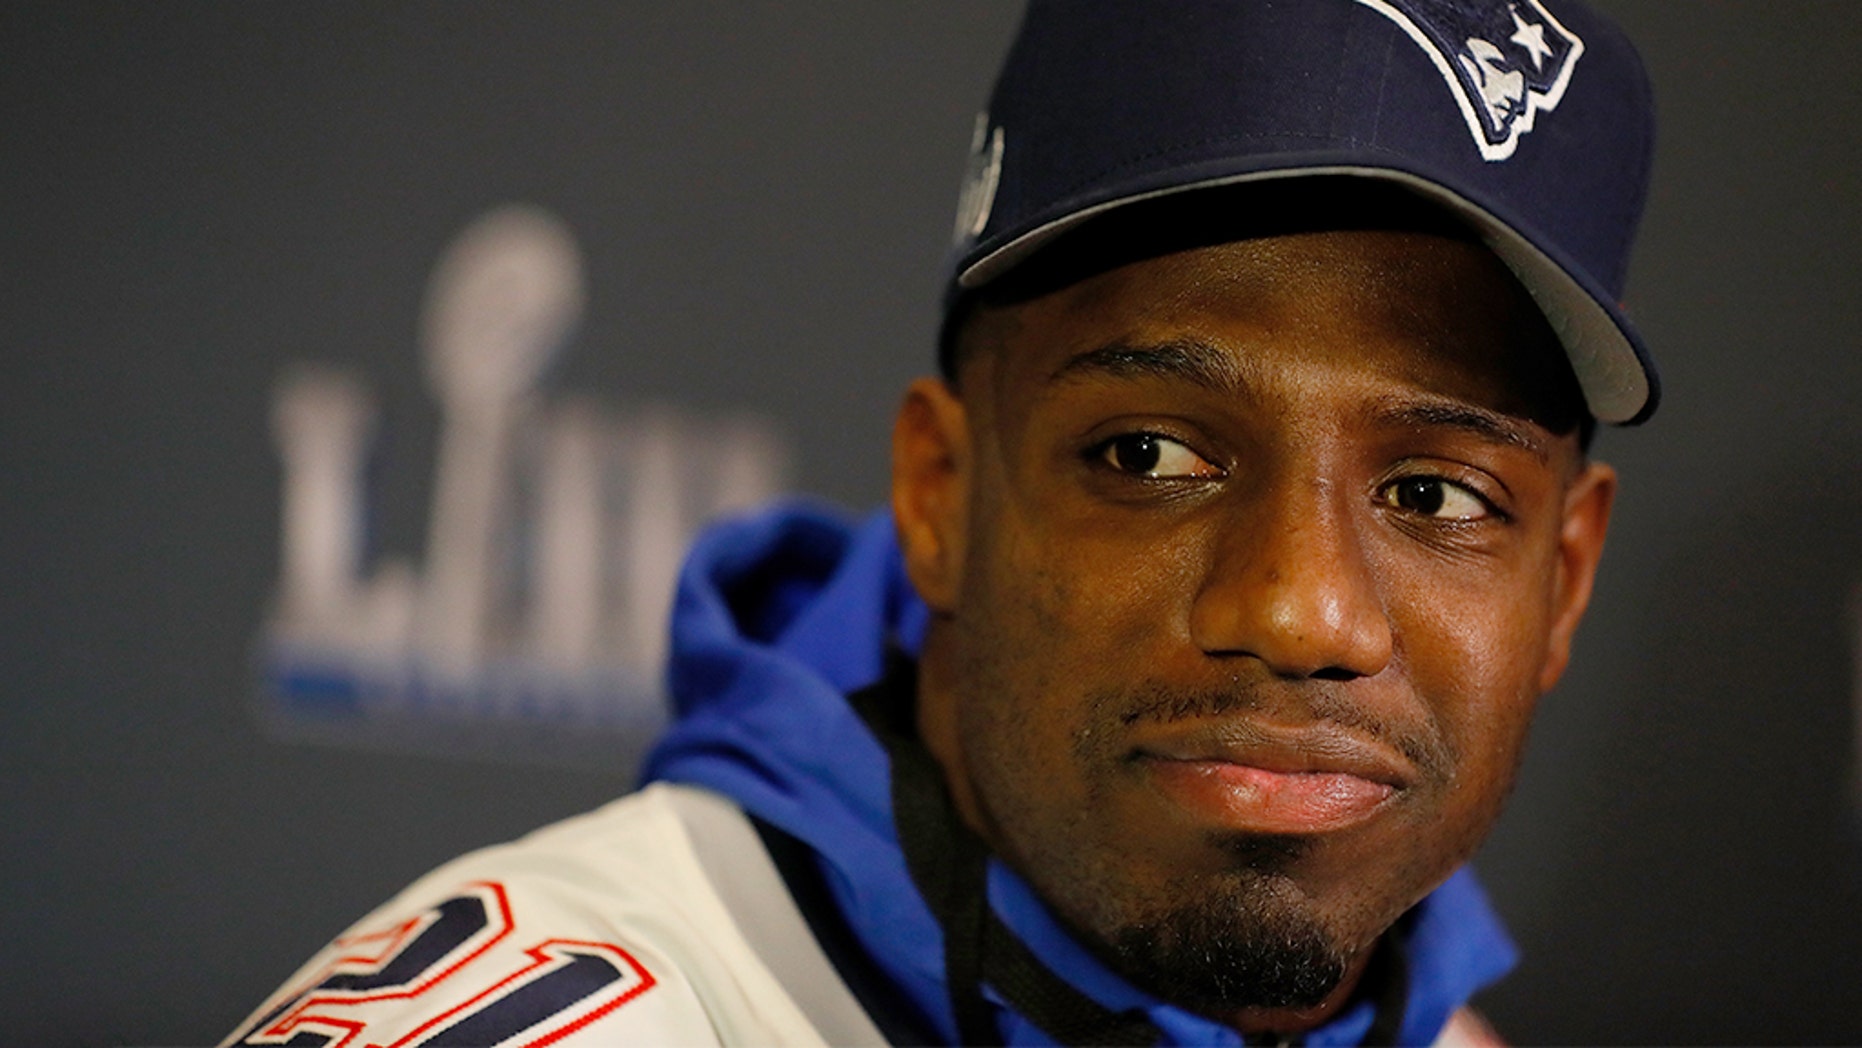 New England Patriots safety Duron Harmon said Sunday he won't visit White House for a celebratory Super Bowl event, which is traditional after professional sports teams win championships.